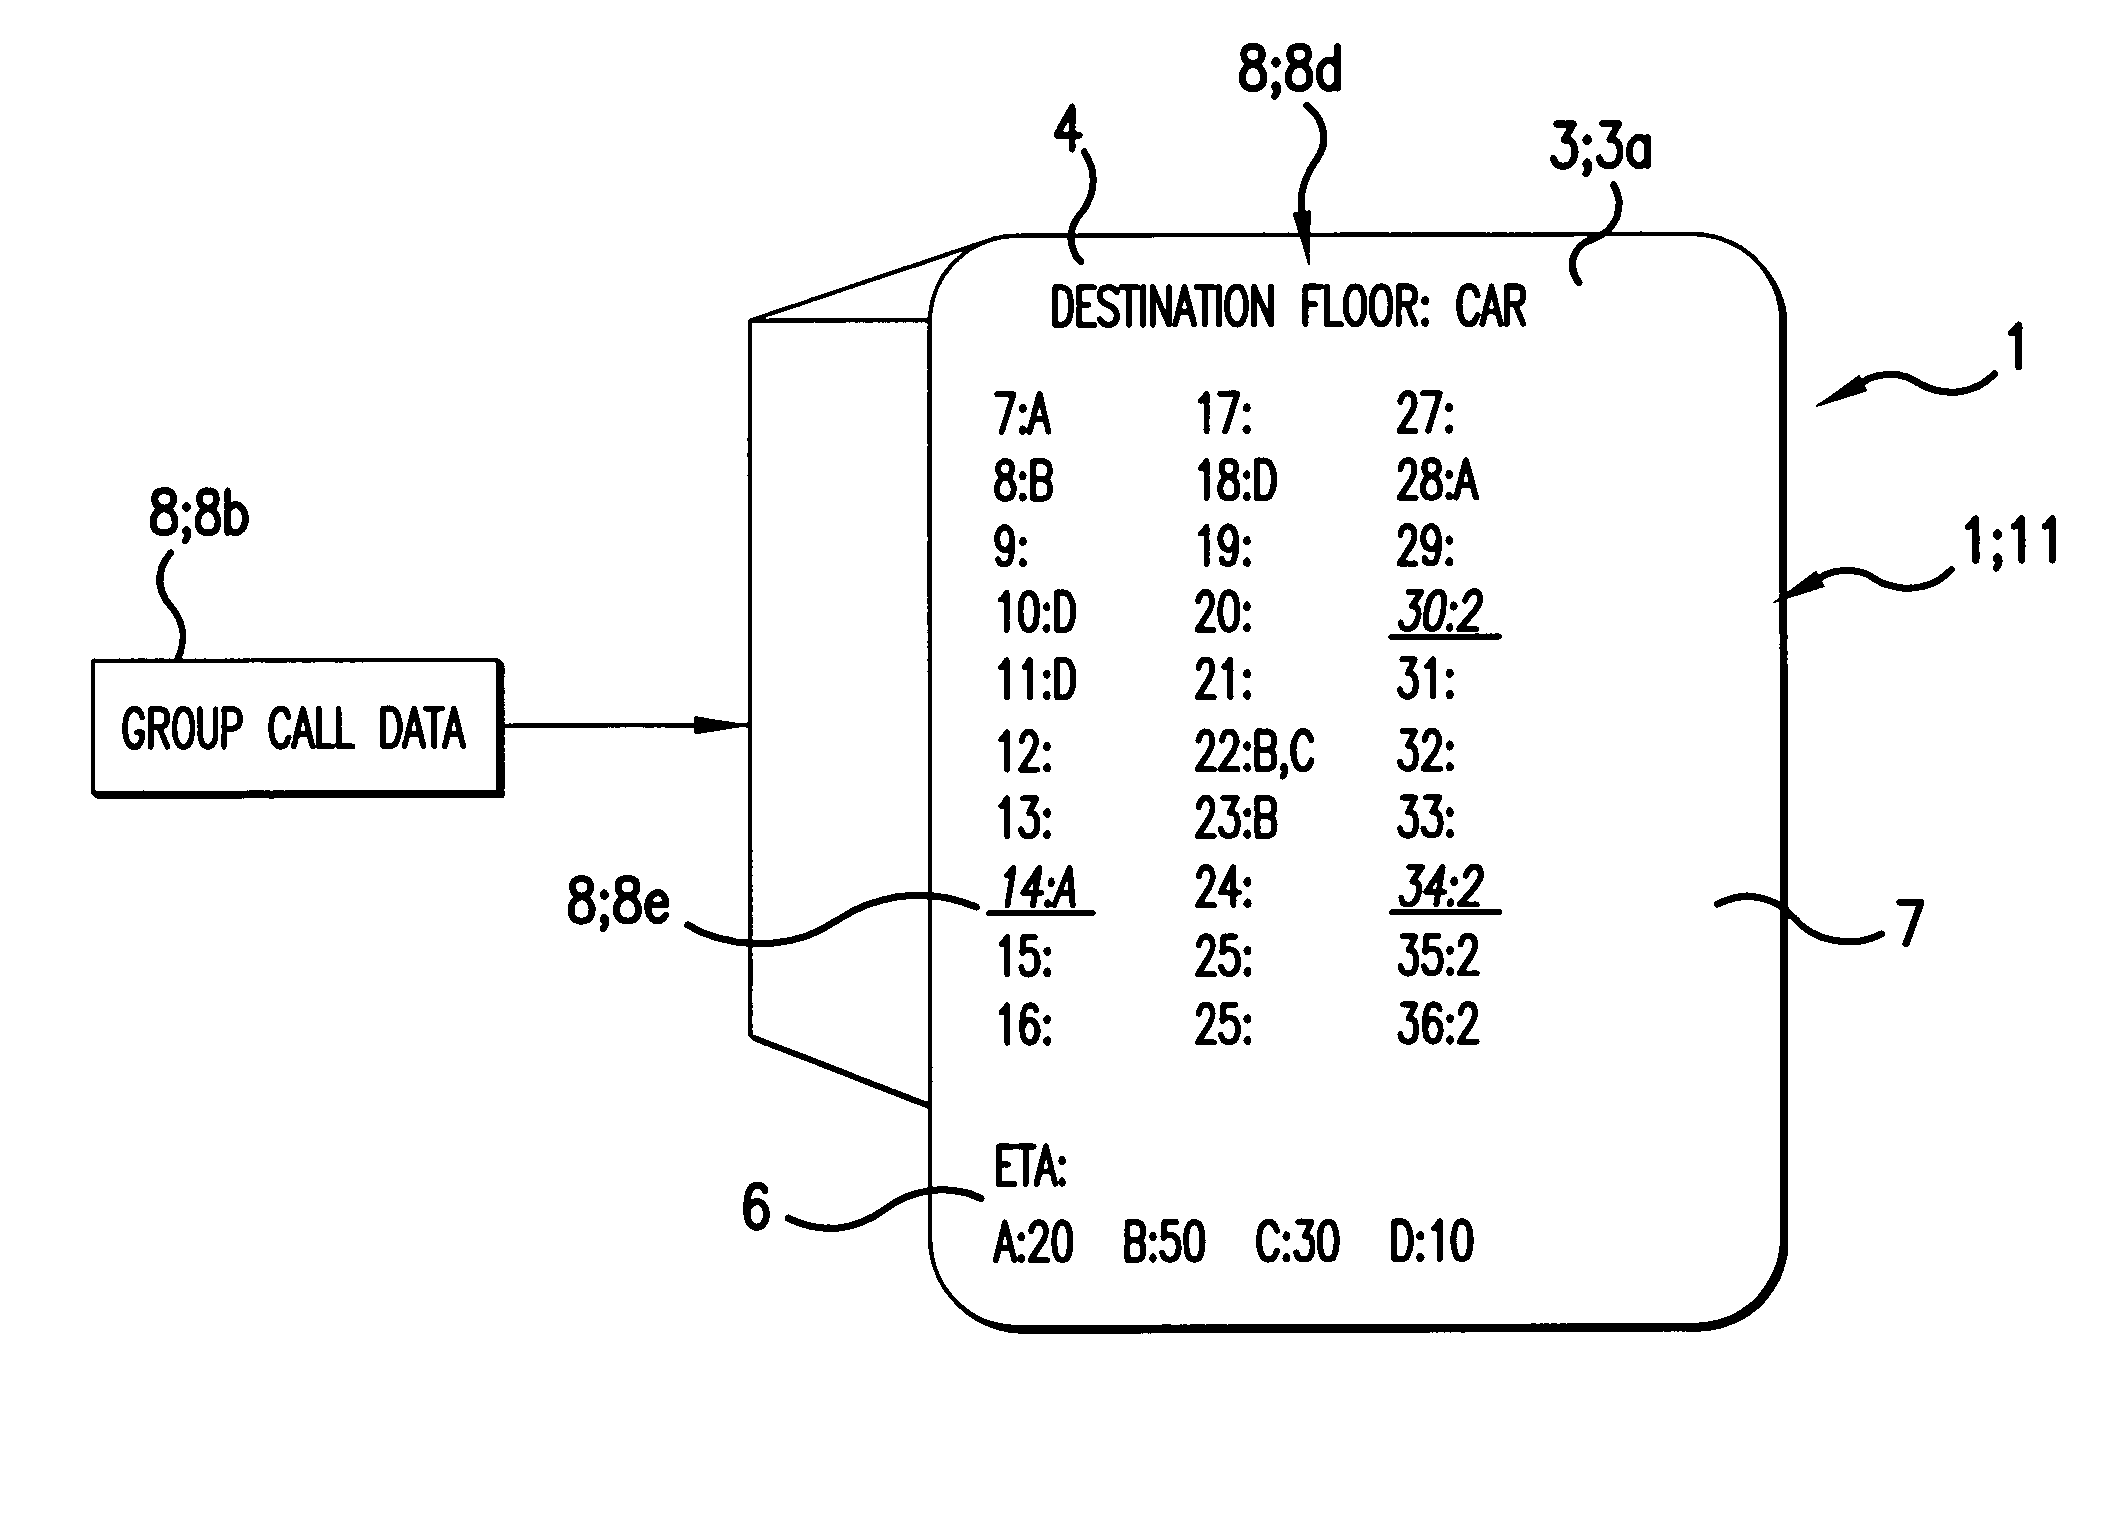 System and display for providing information to elevator passengers